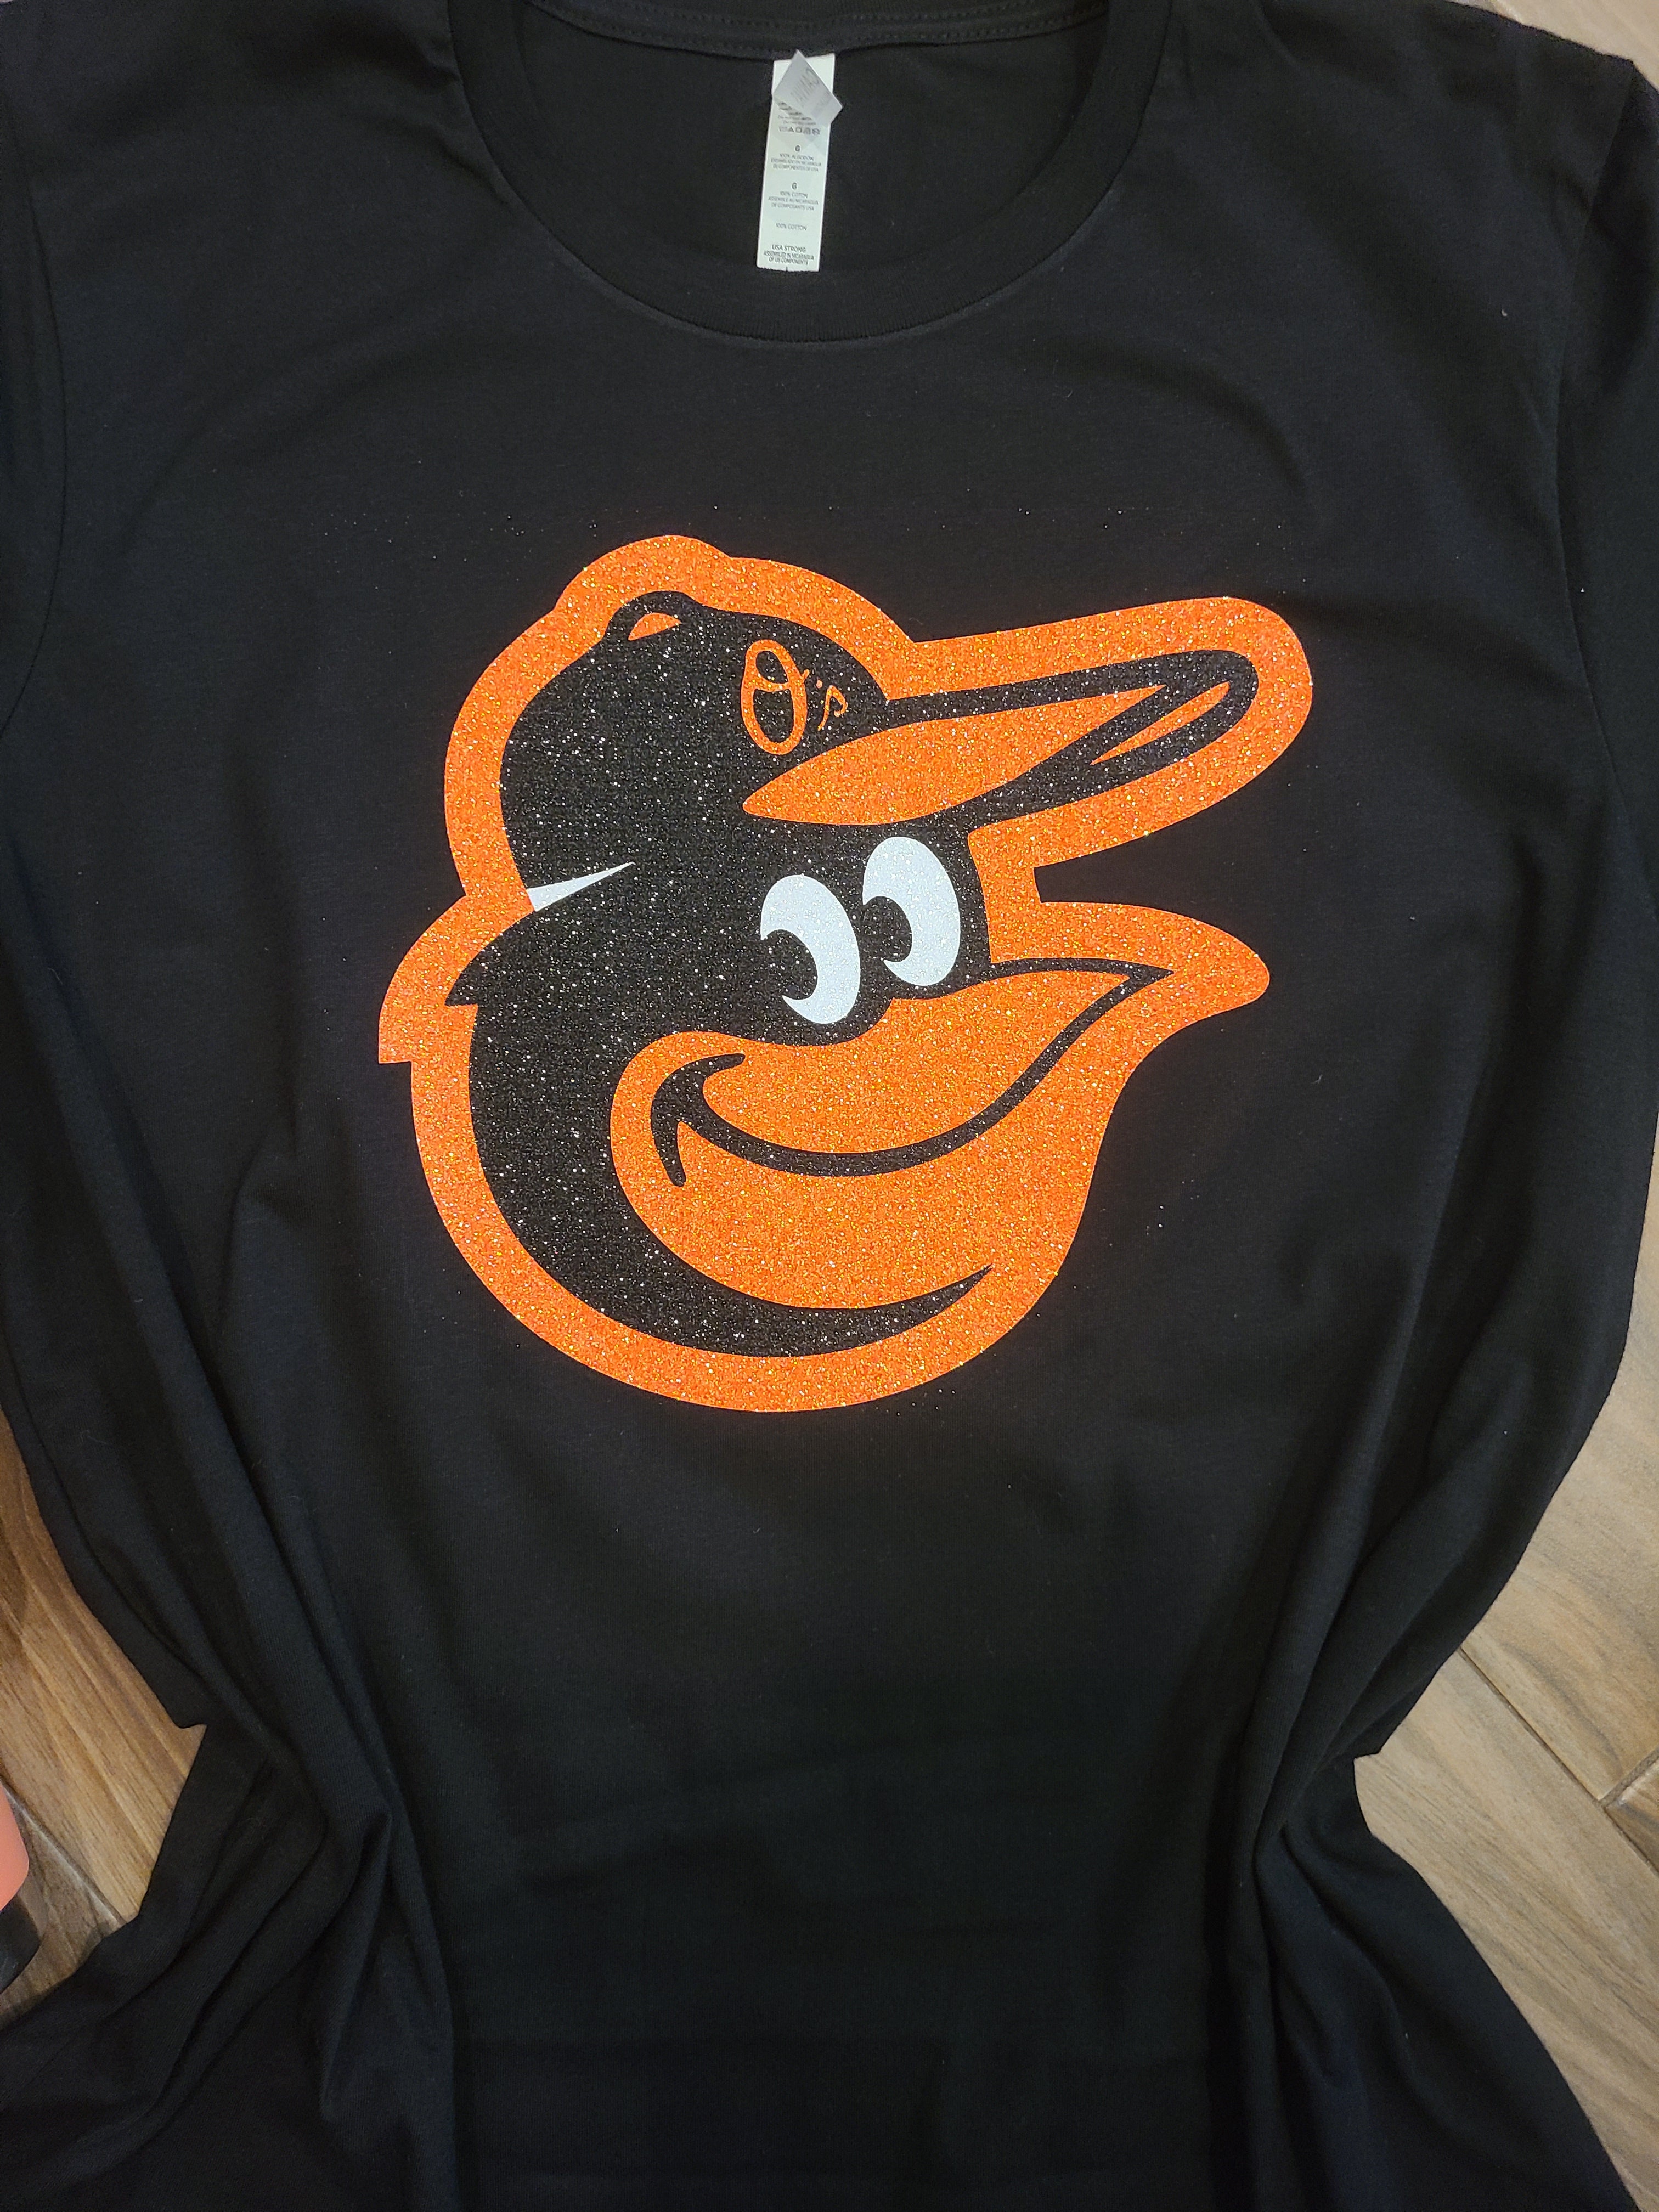 FCAA Orioles Shirts